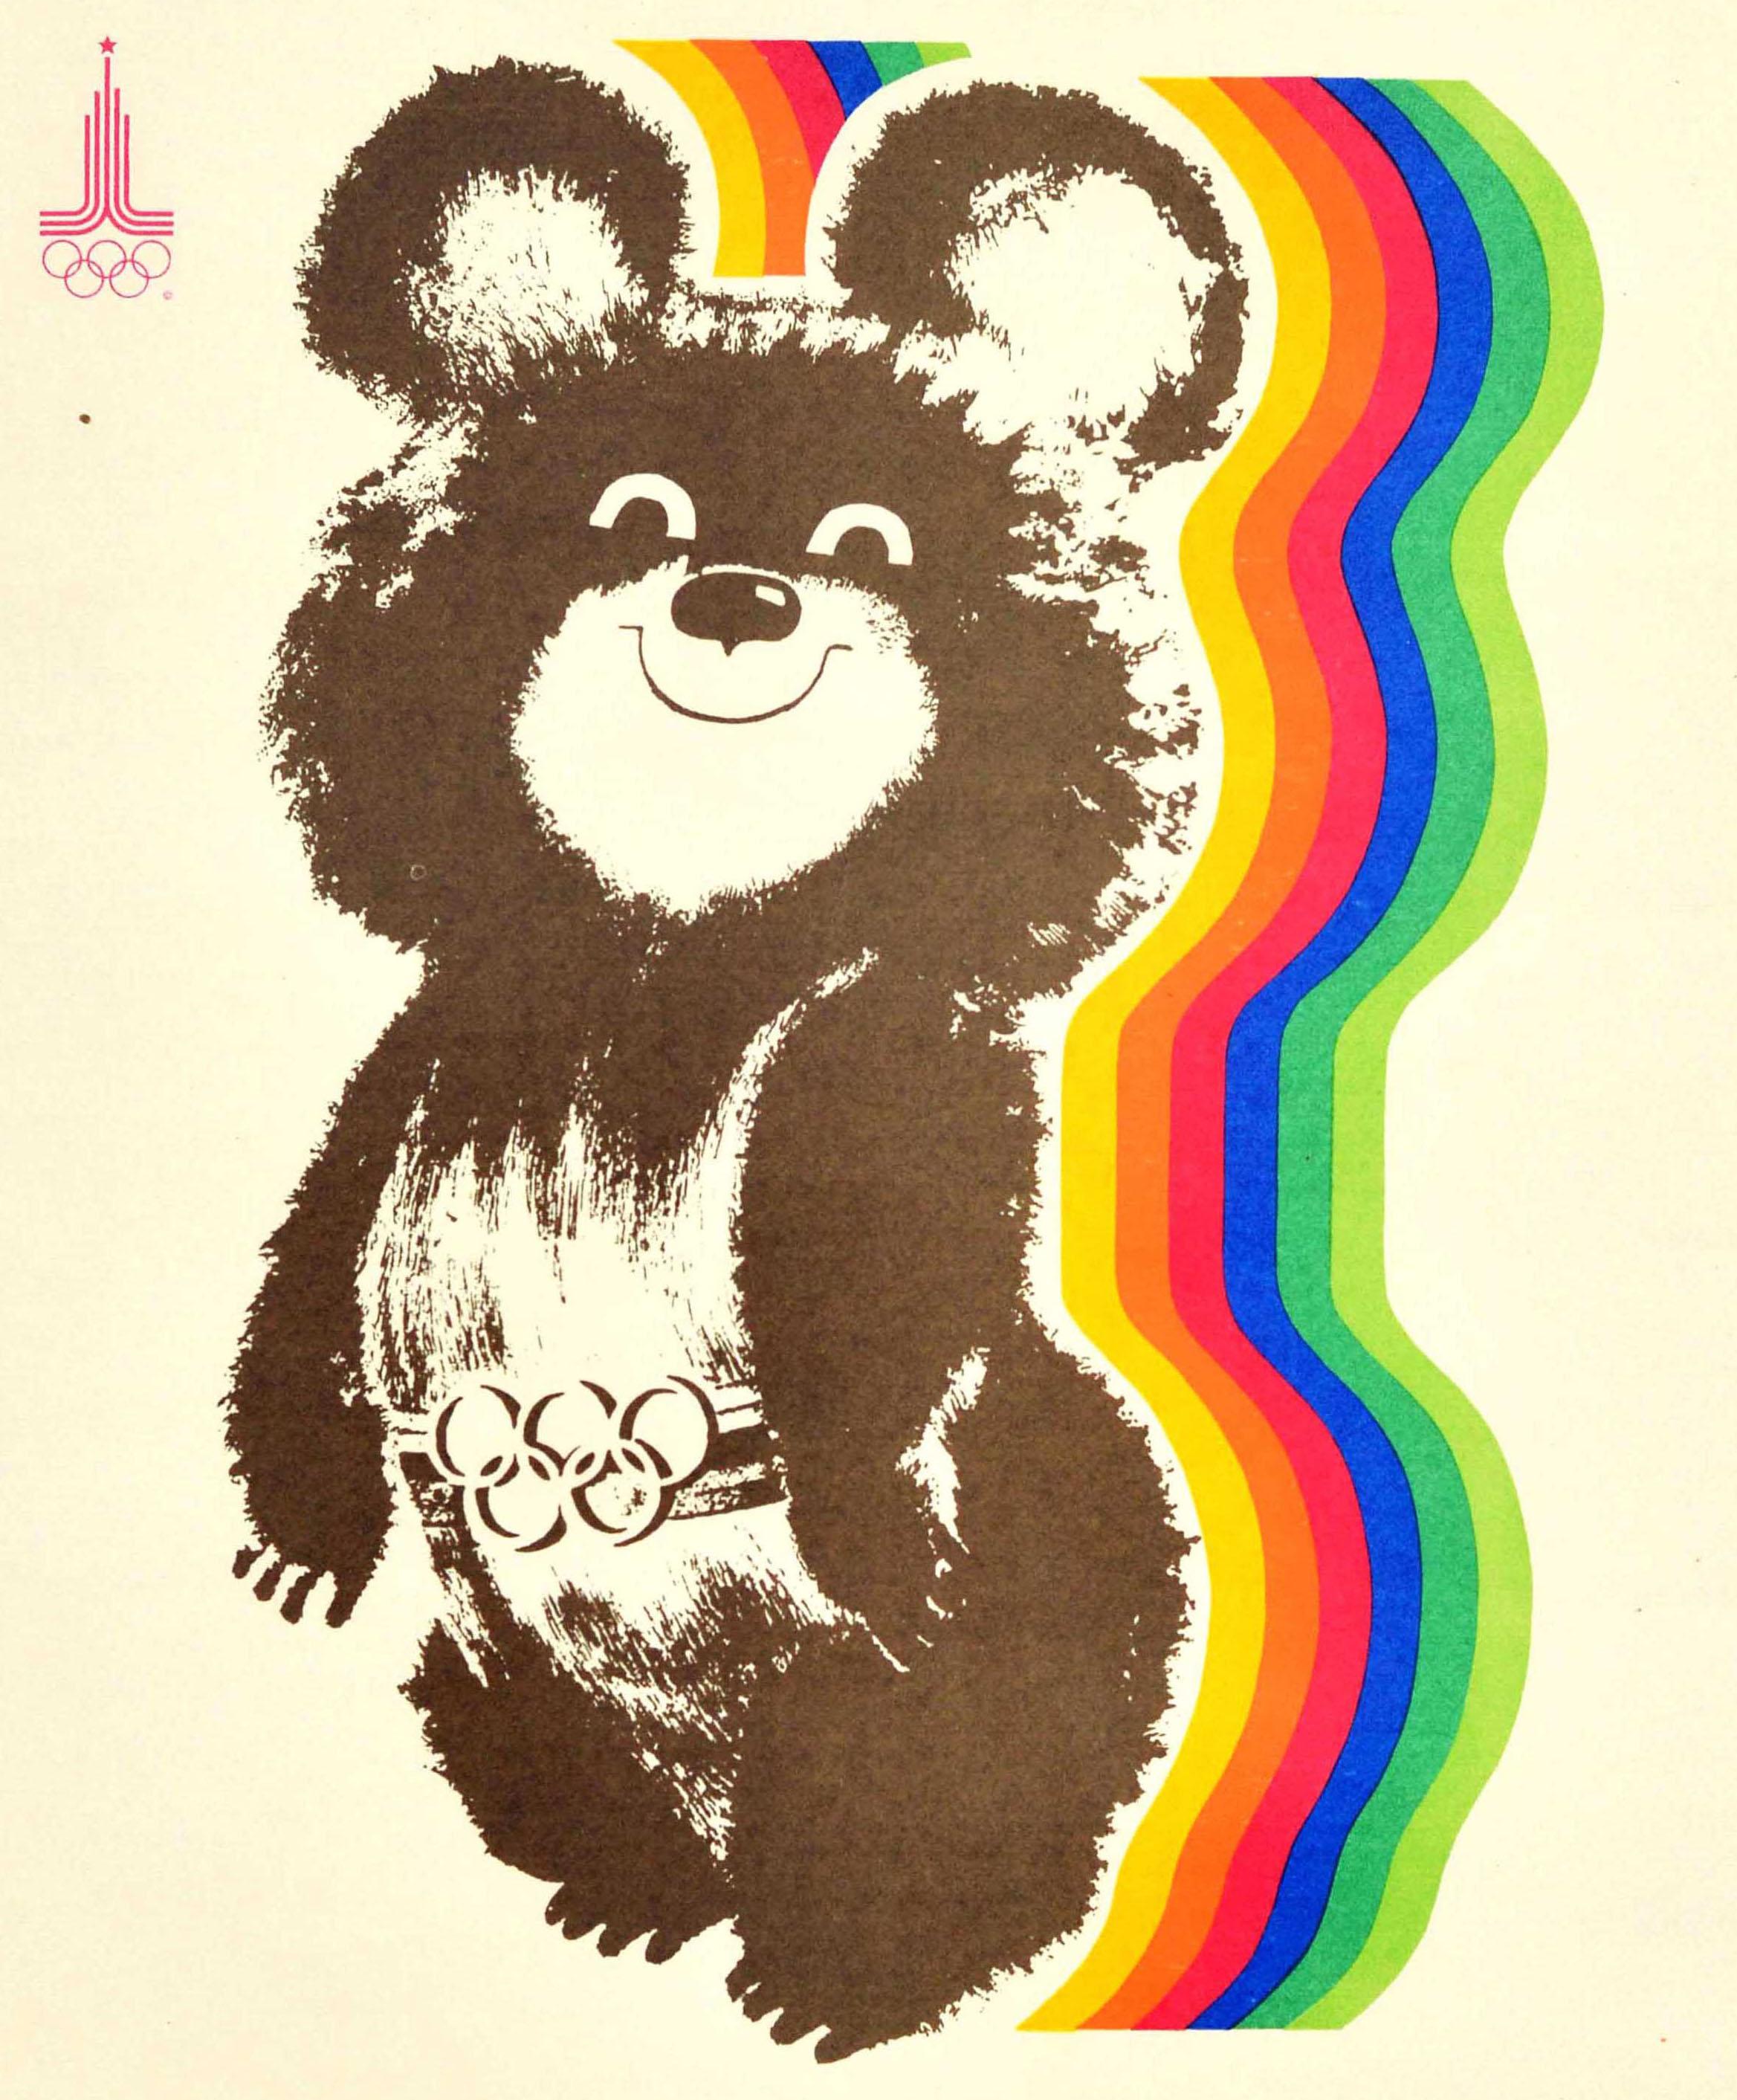 Original vintage Soviet sport poster for the 22nd Summer Olympic Games (Games of the XXII Olympiad) in 1980 held in Moscow Russia featuring a fun and colourful illustration depicting a smiling bear - Misha the Moscow Olympic Games mascot - wearing